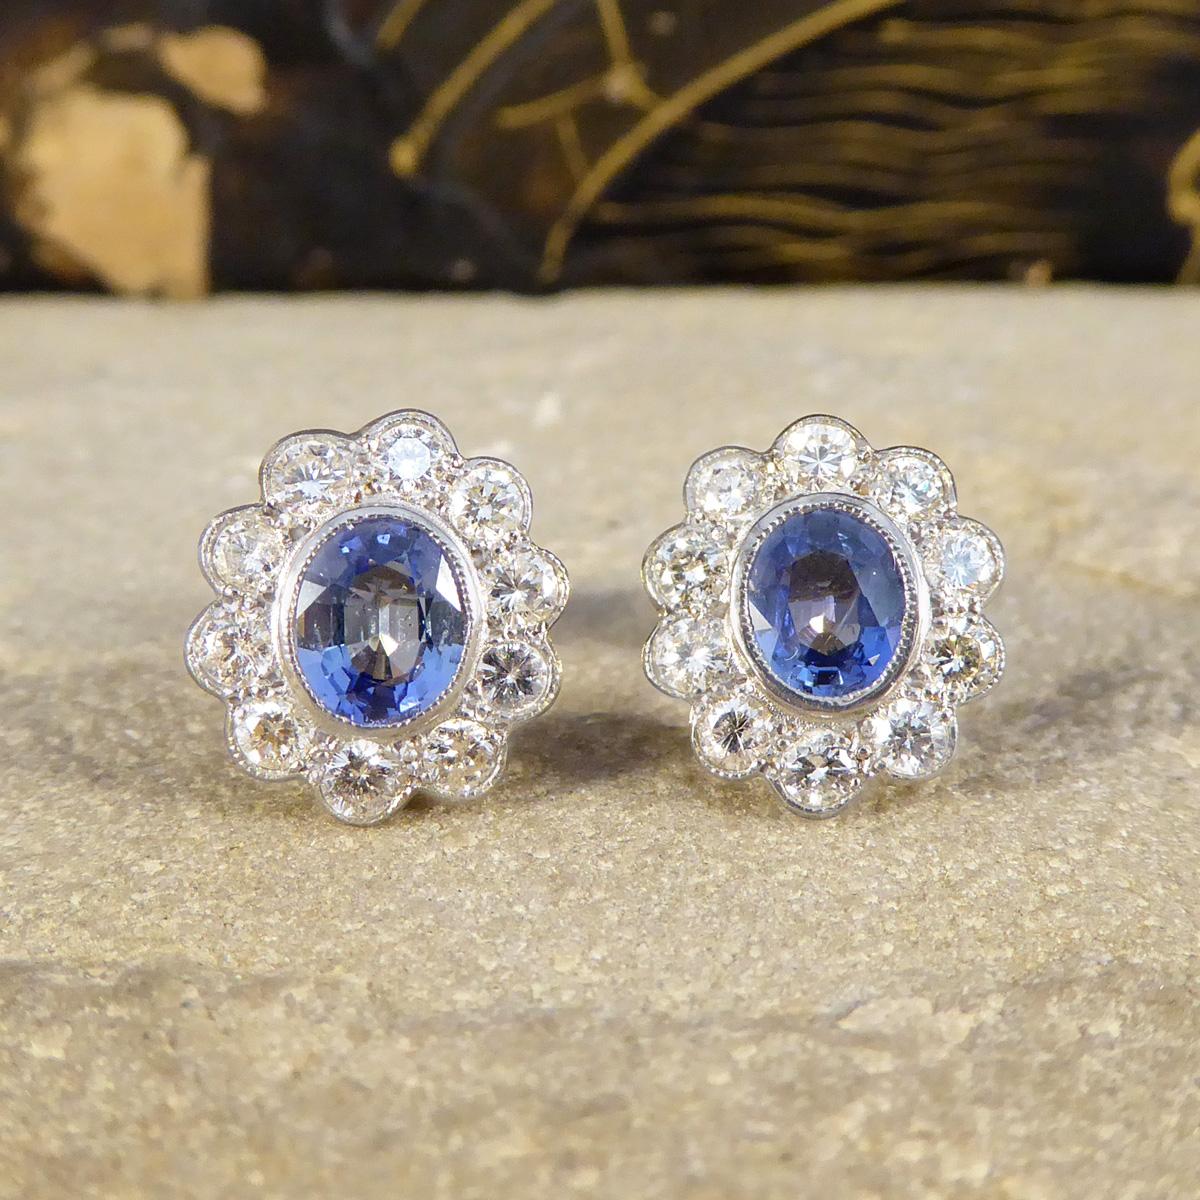 Embrace the elegance of a bygone era with these stunning Edwardian-inspired stud earrings, beautifully crafted in 18ct Yellow and White Gold. Each earring features an exquisite oval sapphire, known for its deep, mesmerising and bright blue colour,